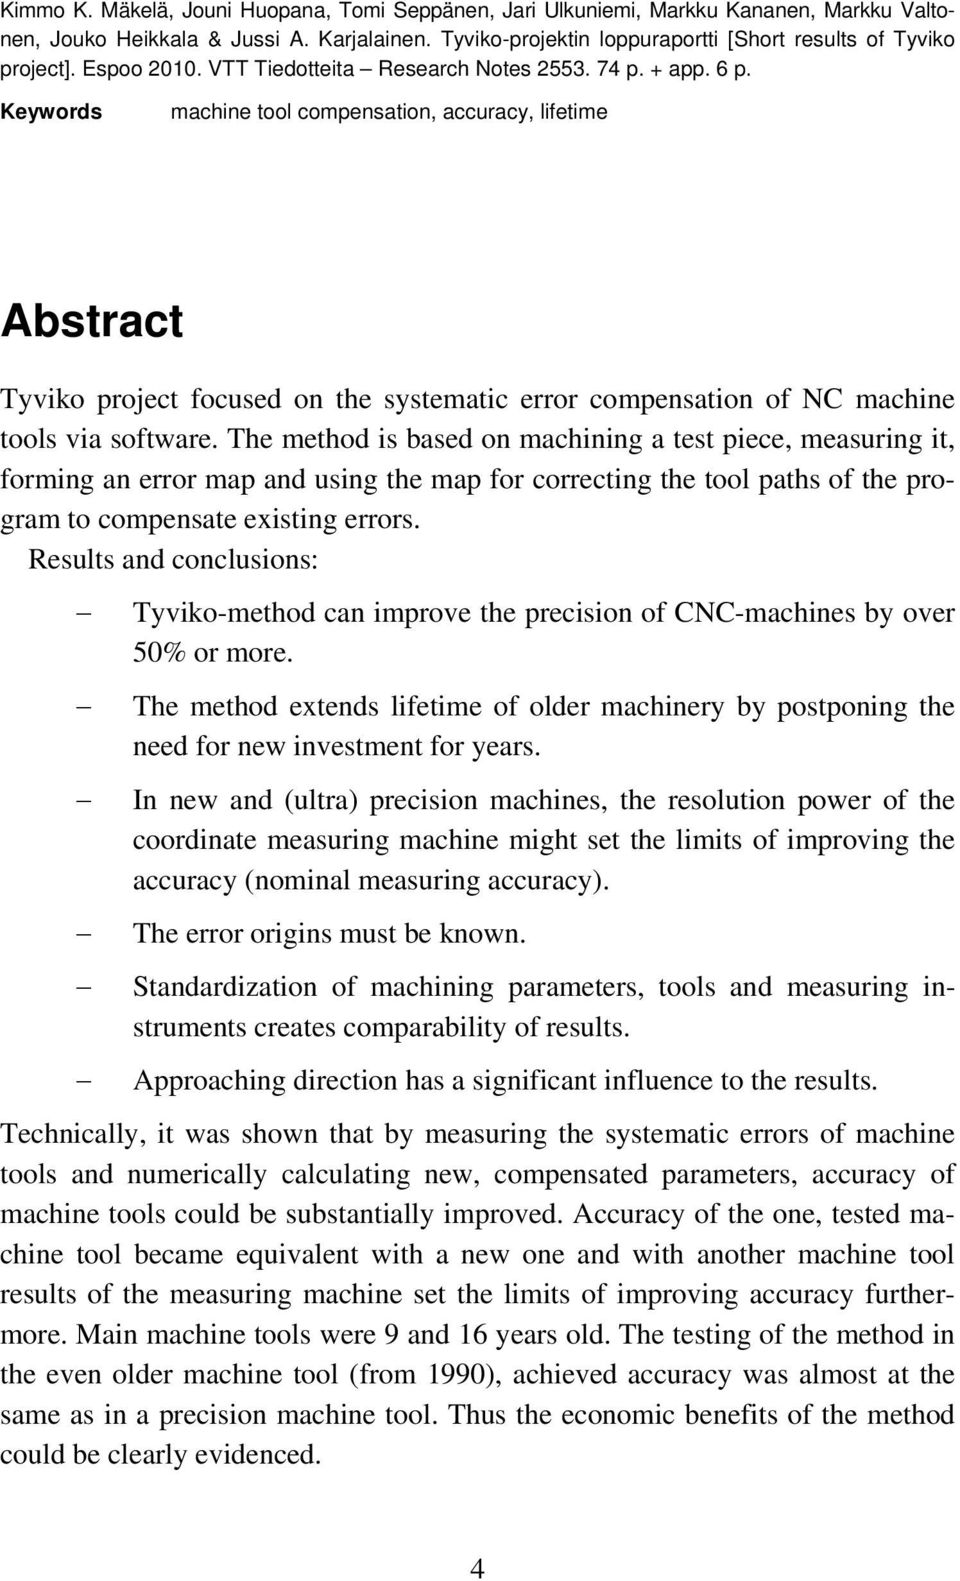 Keywords machine tool compensation, accuracy, lifetime Abstract Tyviko project focused on the systematic error compensation of NC machine tools via software.